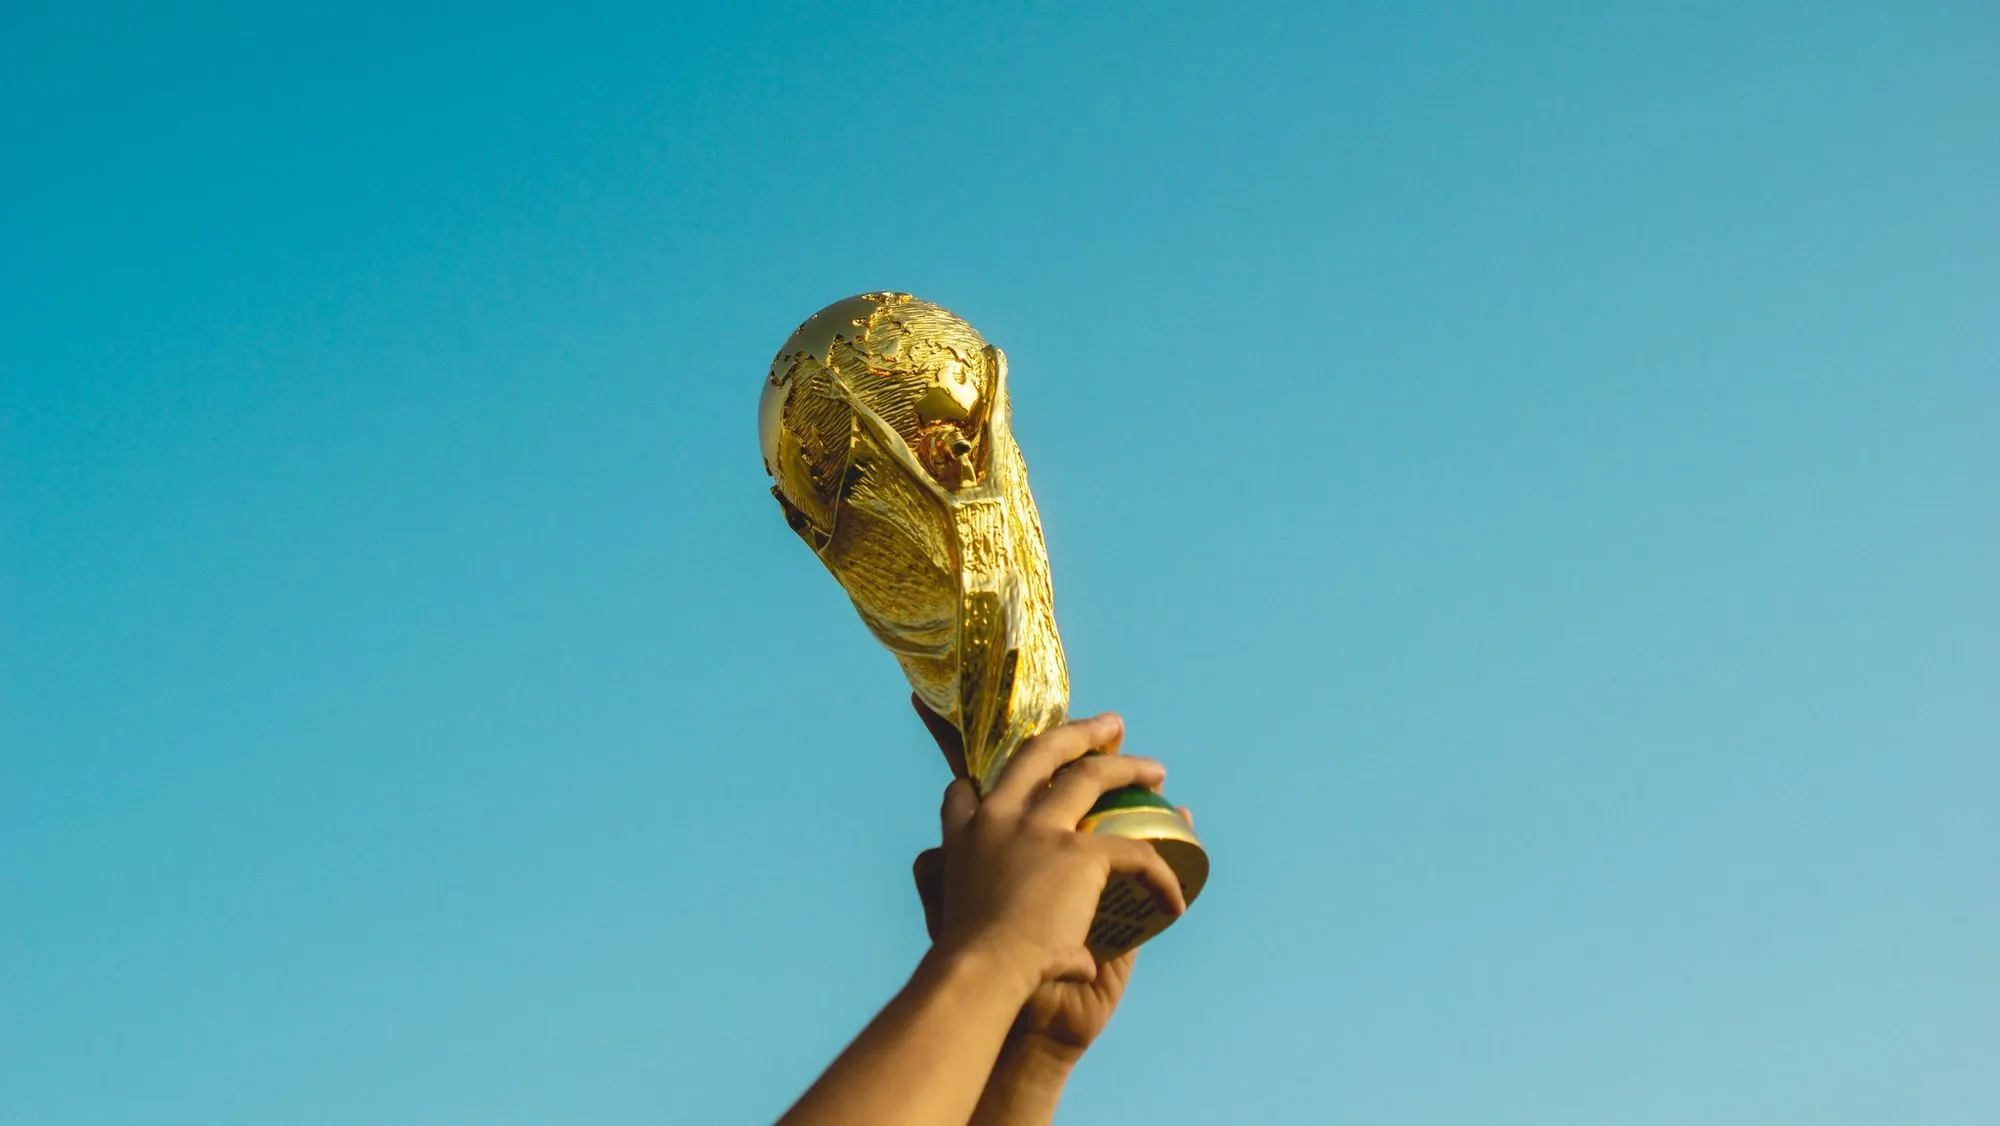 holding up the World Cup trophy